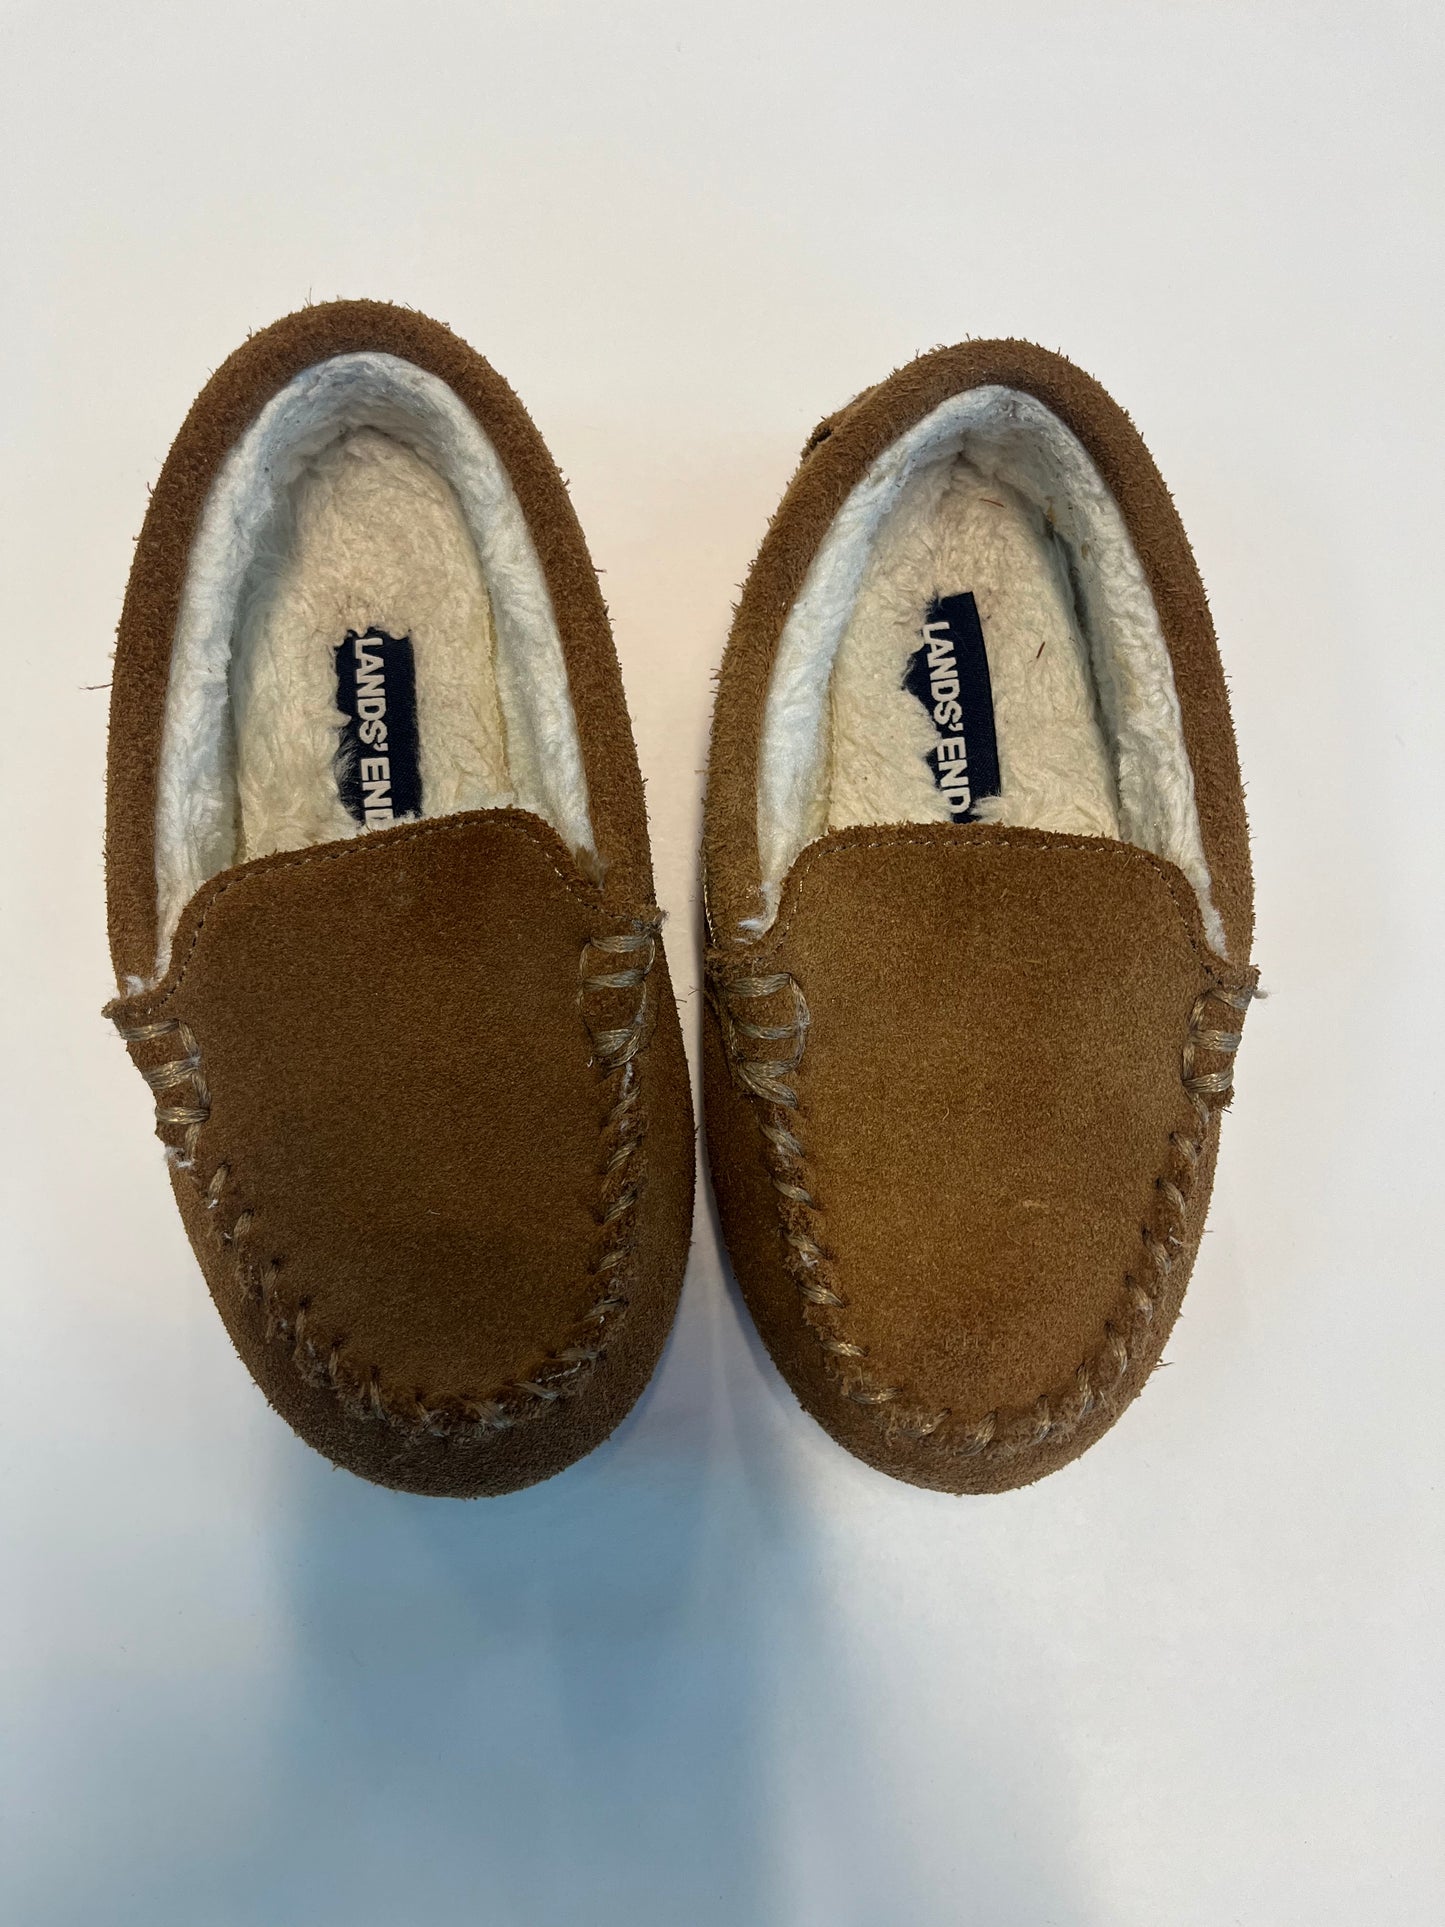 Lands End slippers size 10